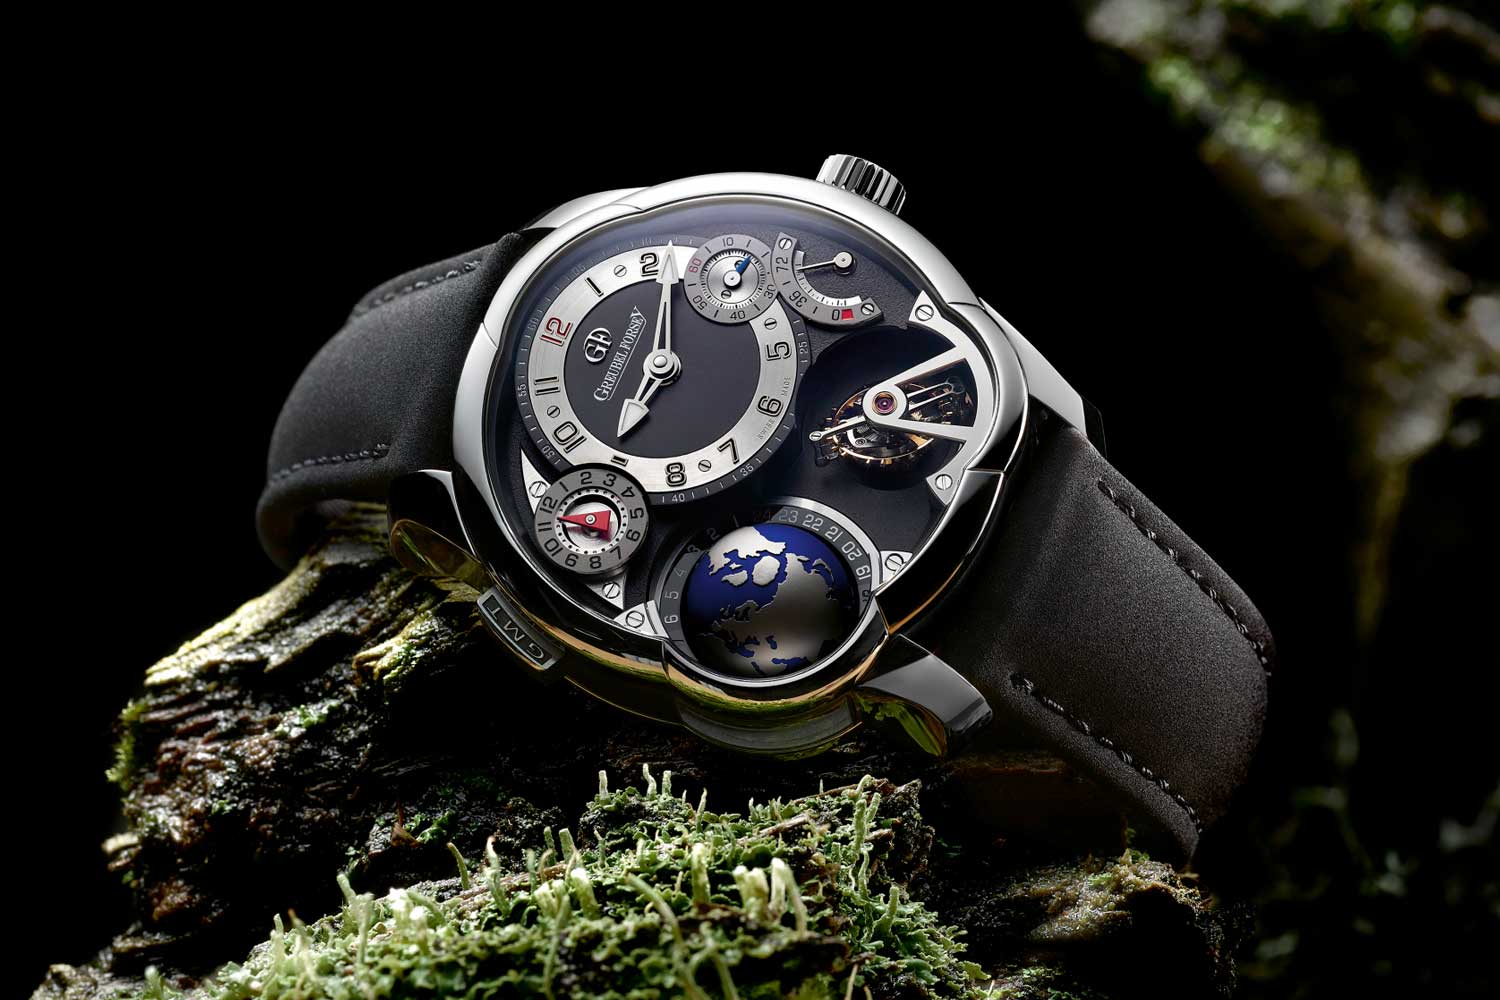 This year high-end producer Greubel Forsey Breitling's flat-packed packaging is a less wasteful way forward eschewed leather straps in favour of exclusively plant-based alternatives